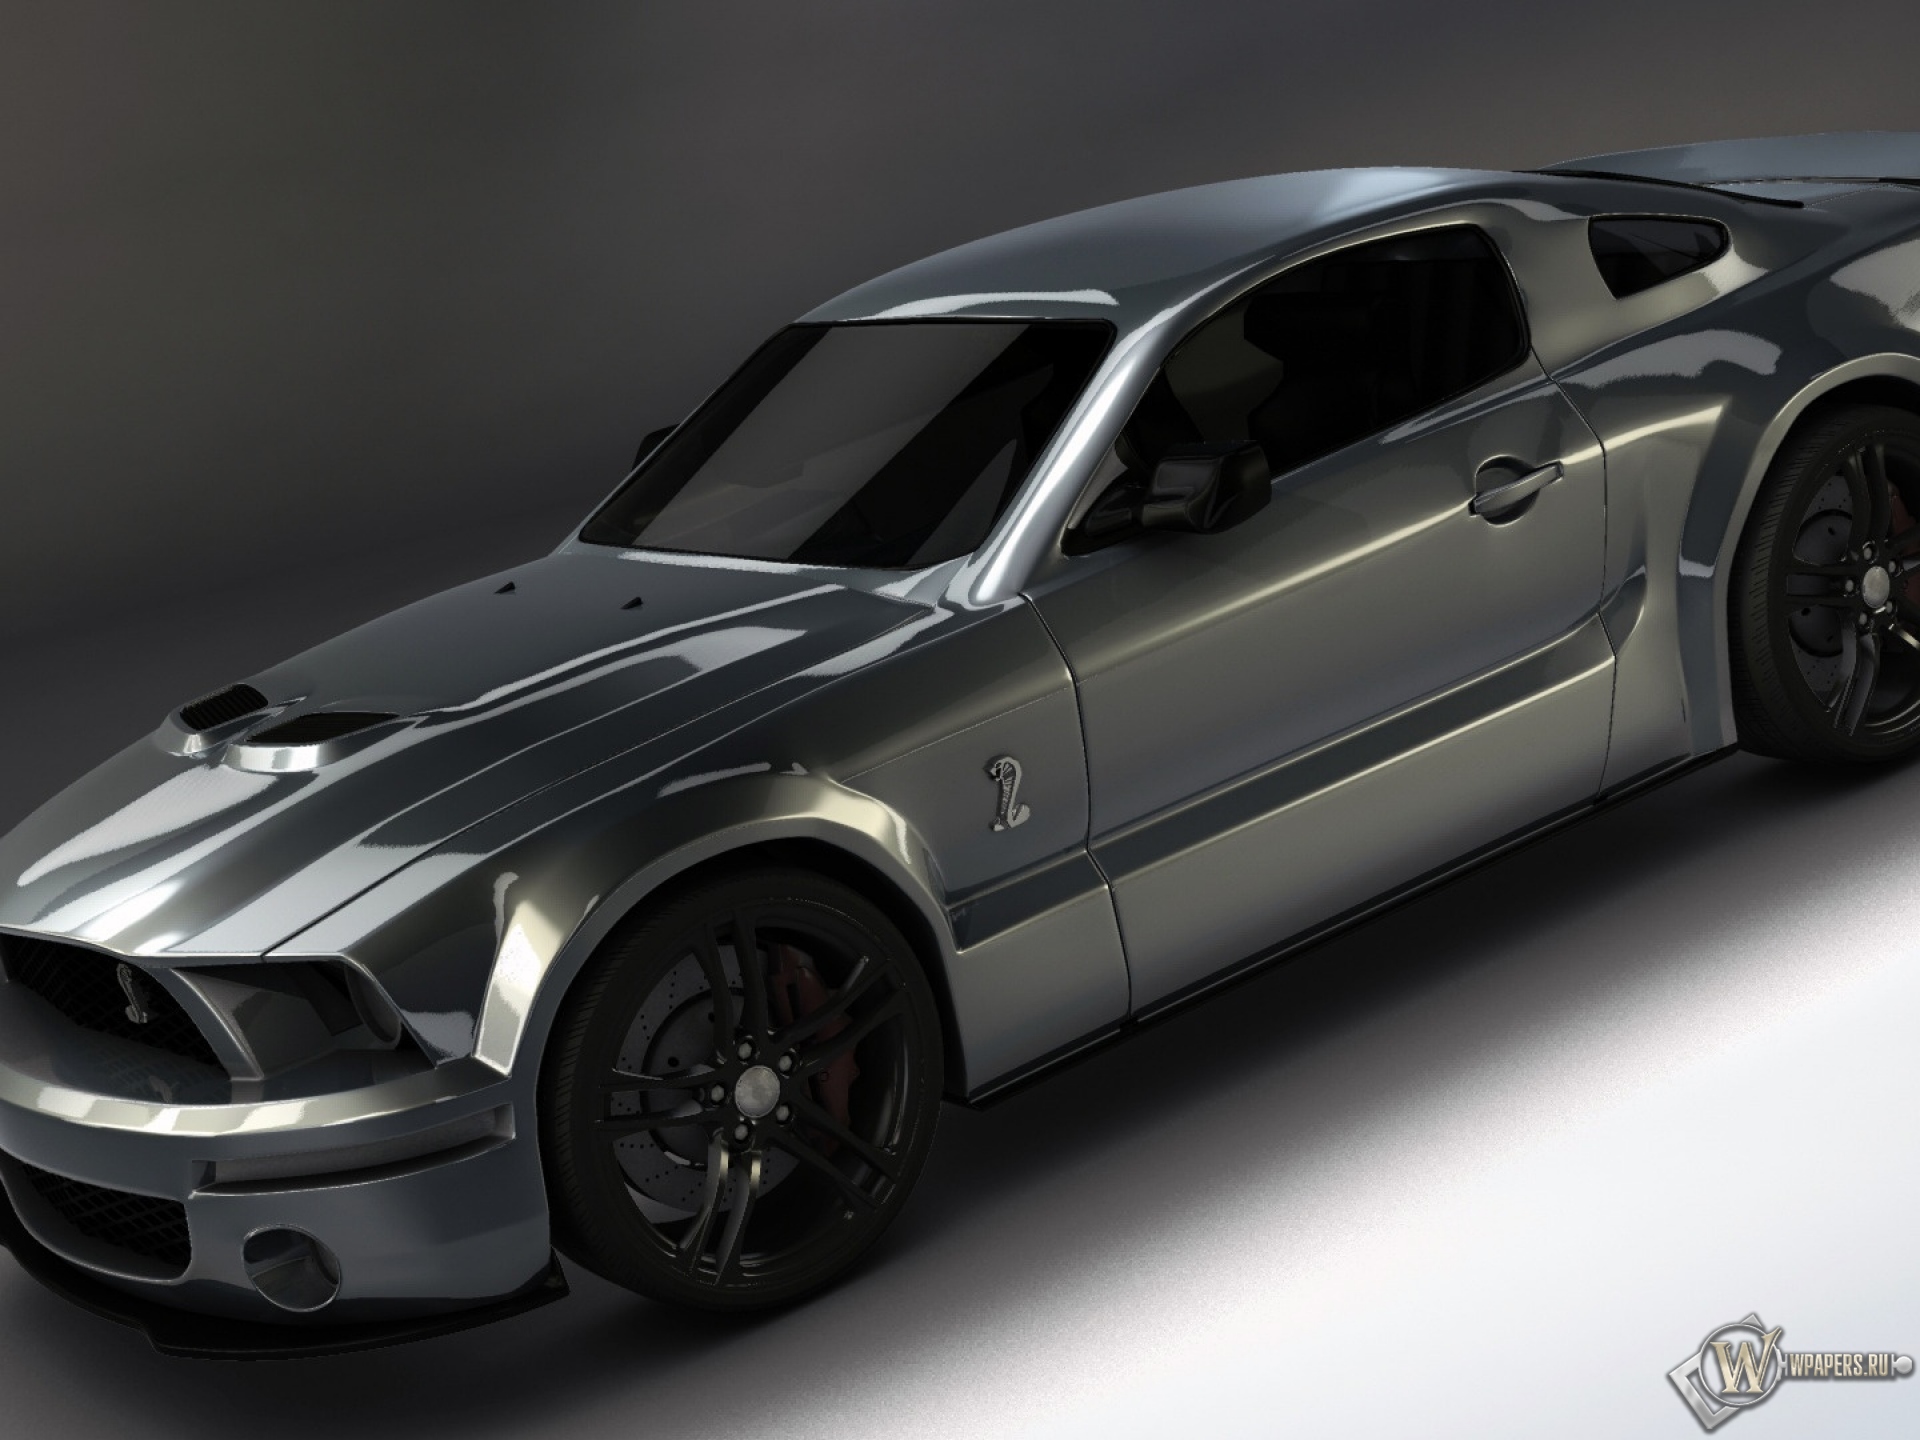 Ford Mustang Shelby GT500 1920x1440